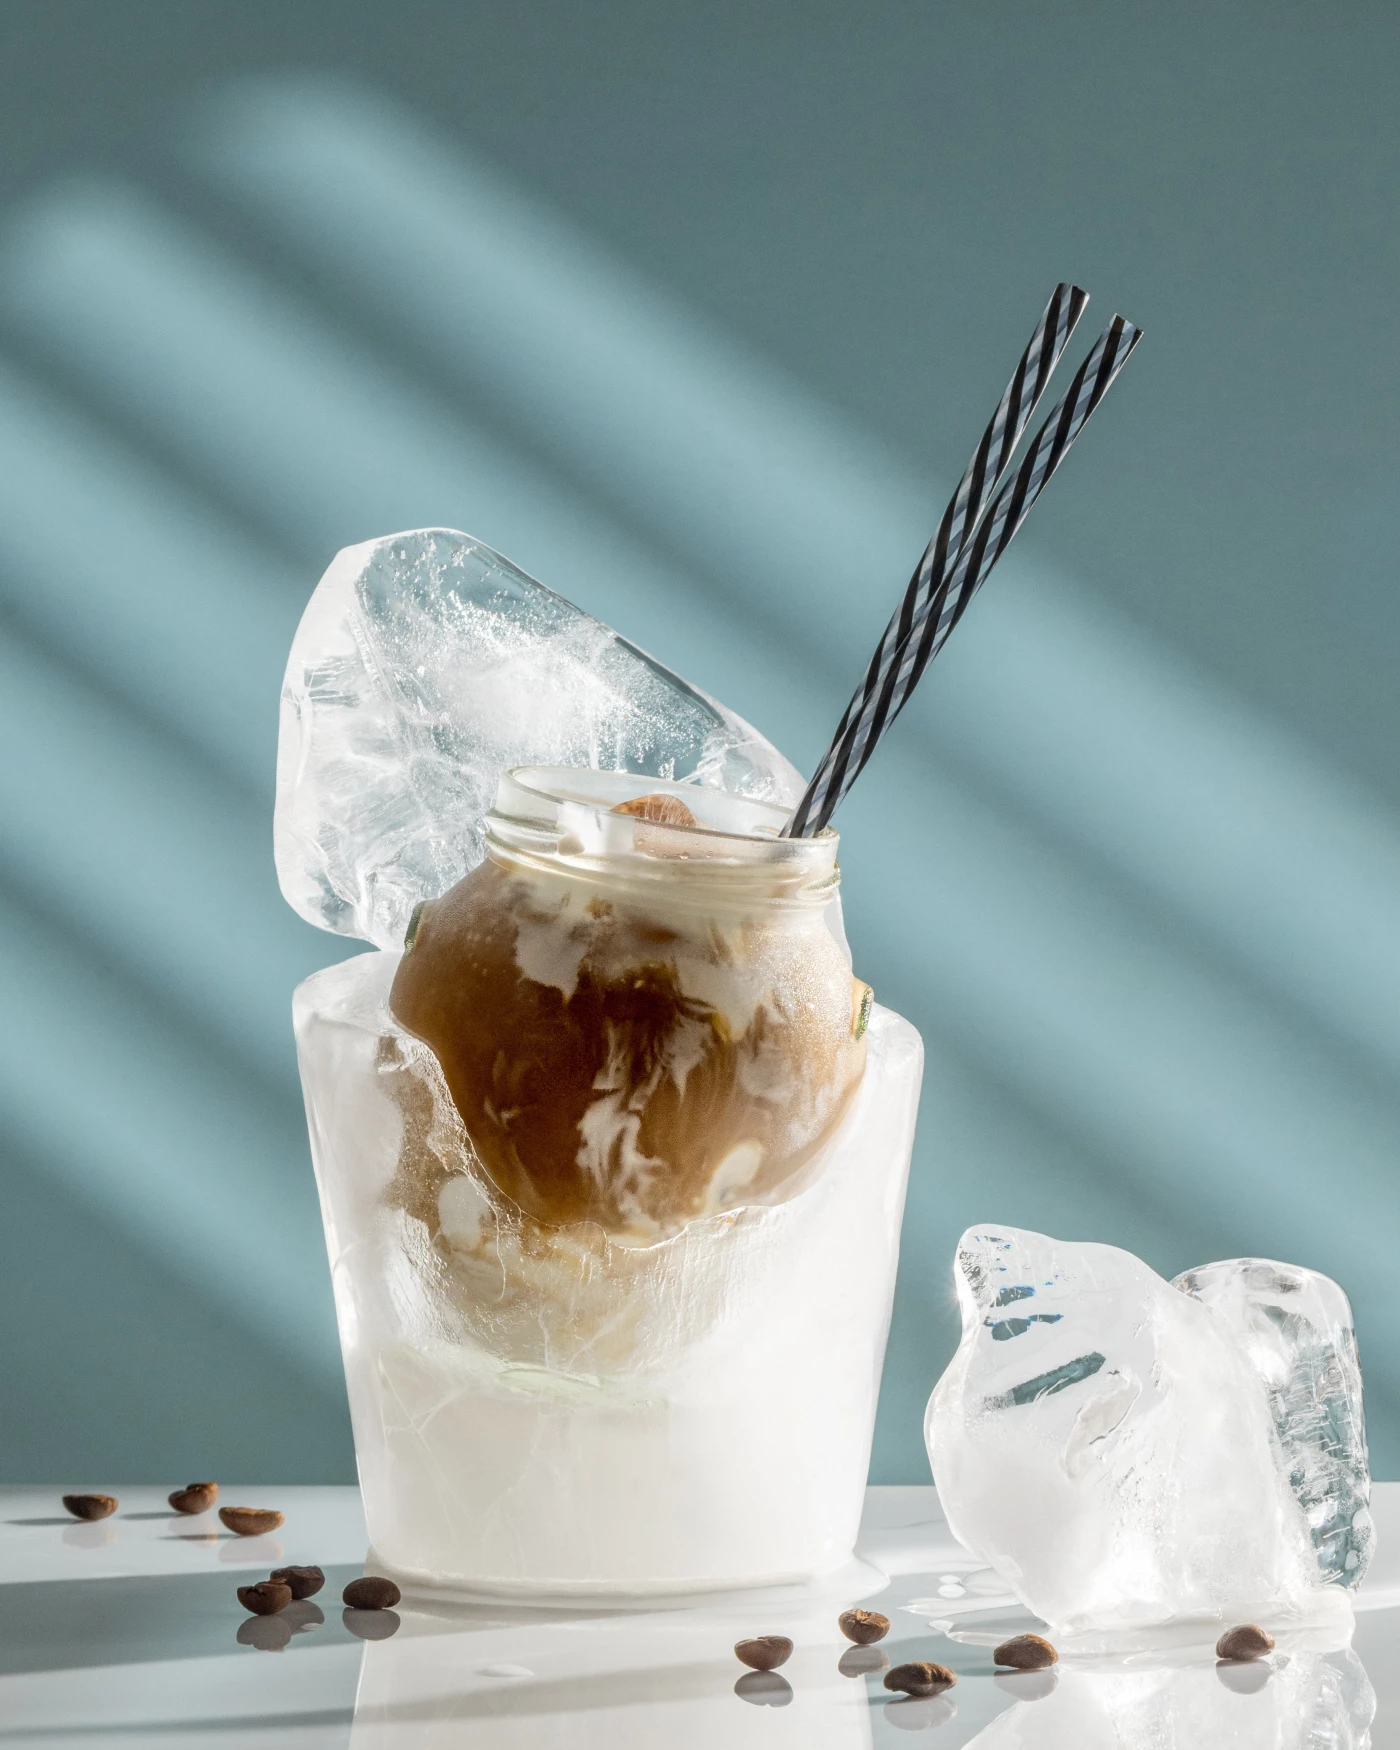 Oh, I love this one. Well, here the iced coffee with milk is really icy :) Minimal style with cold t...